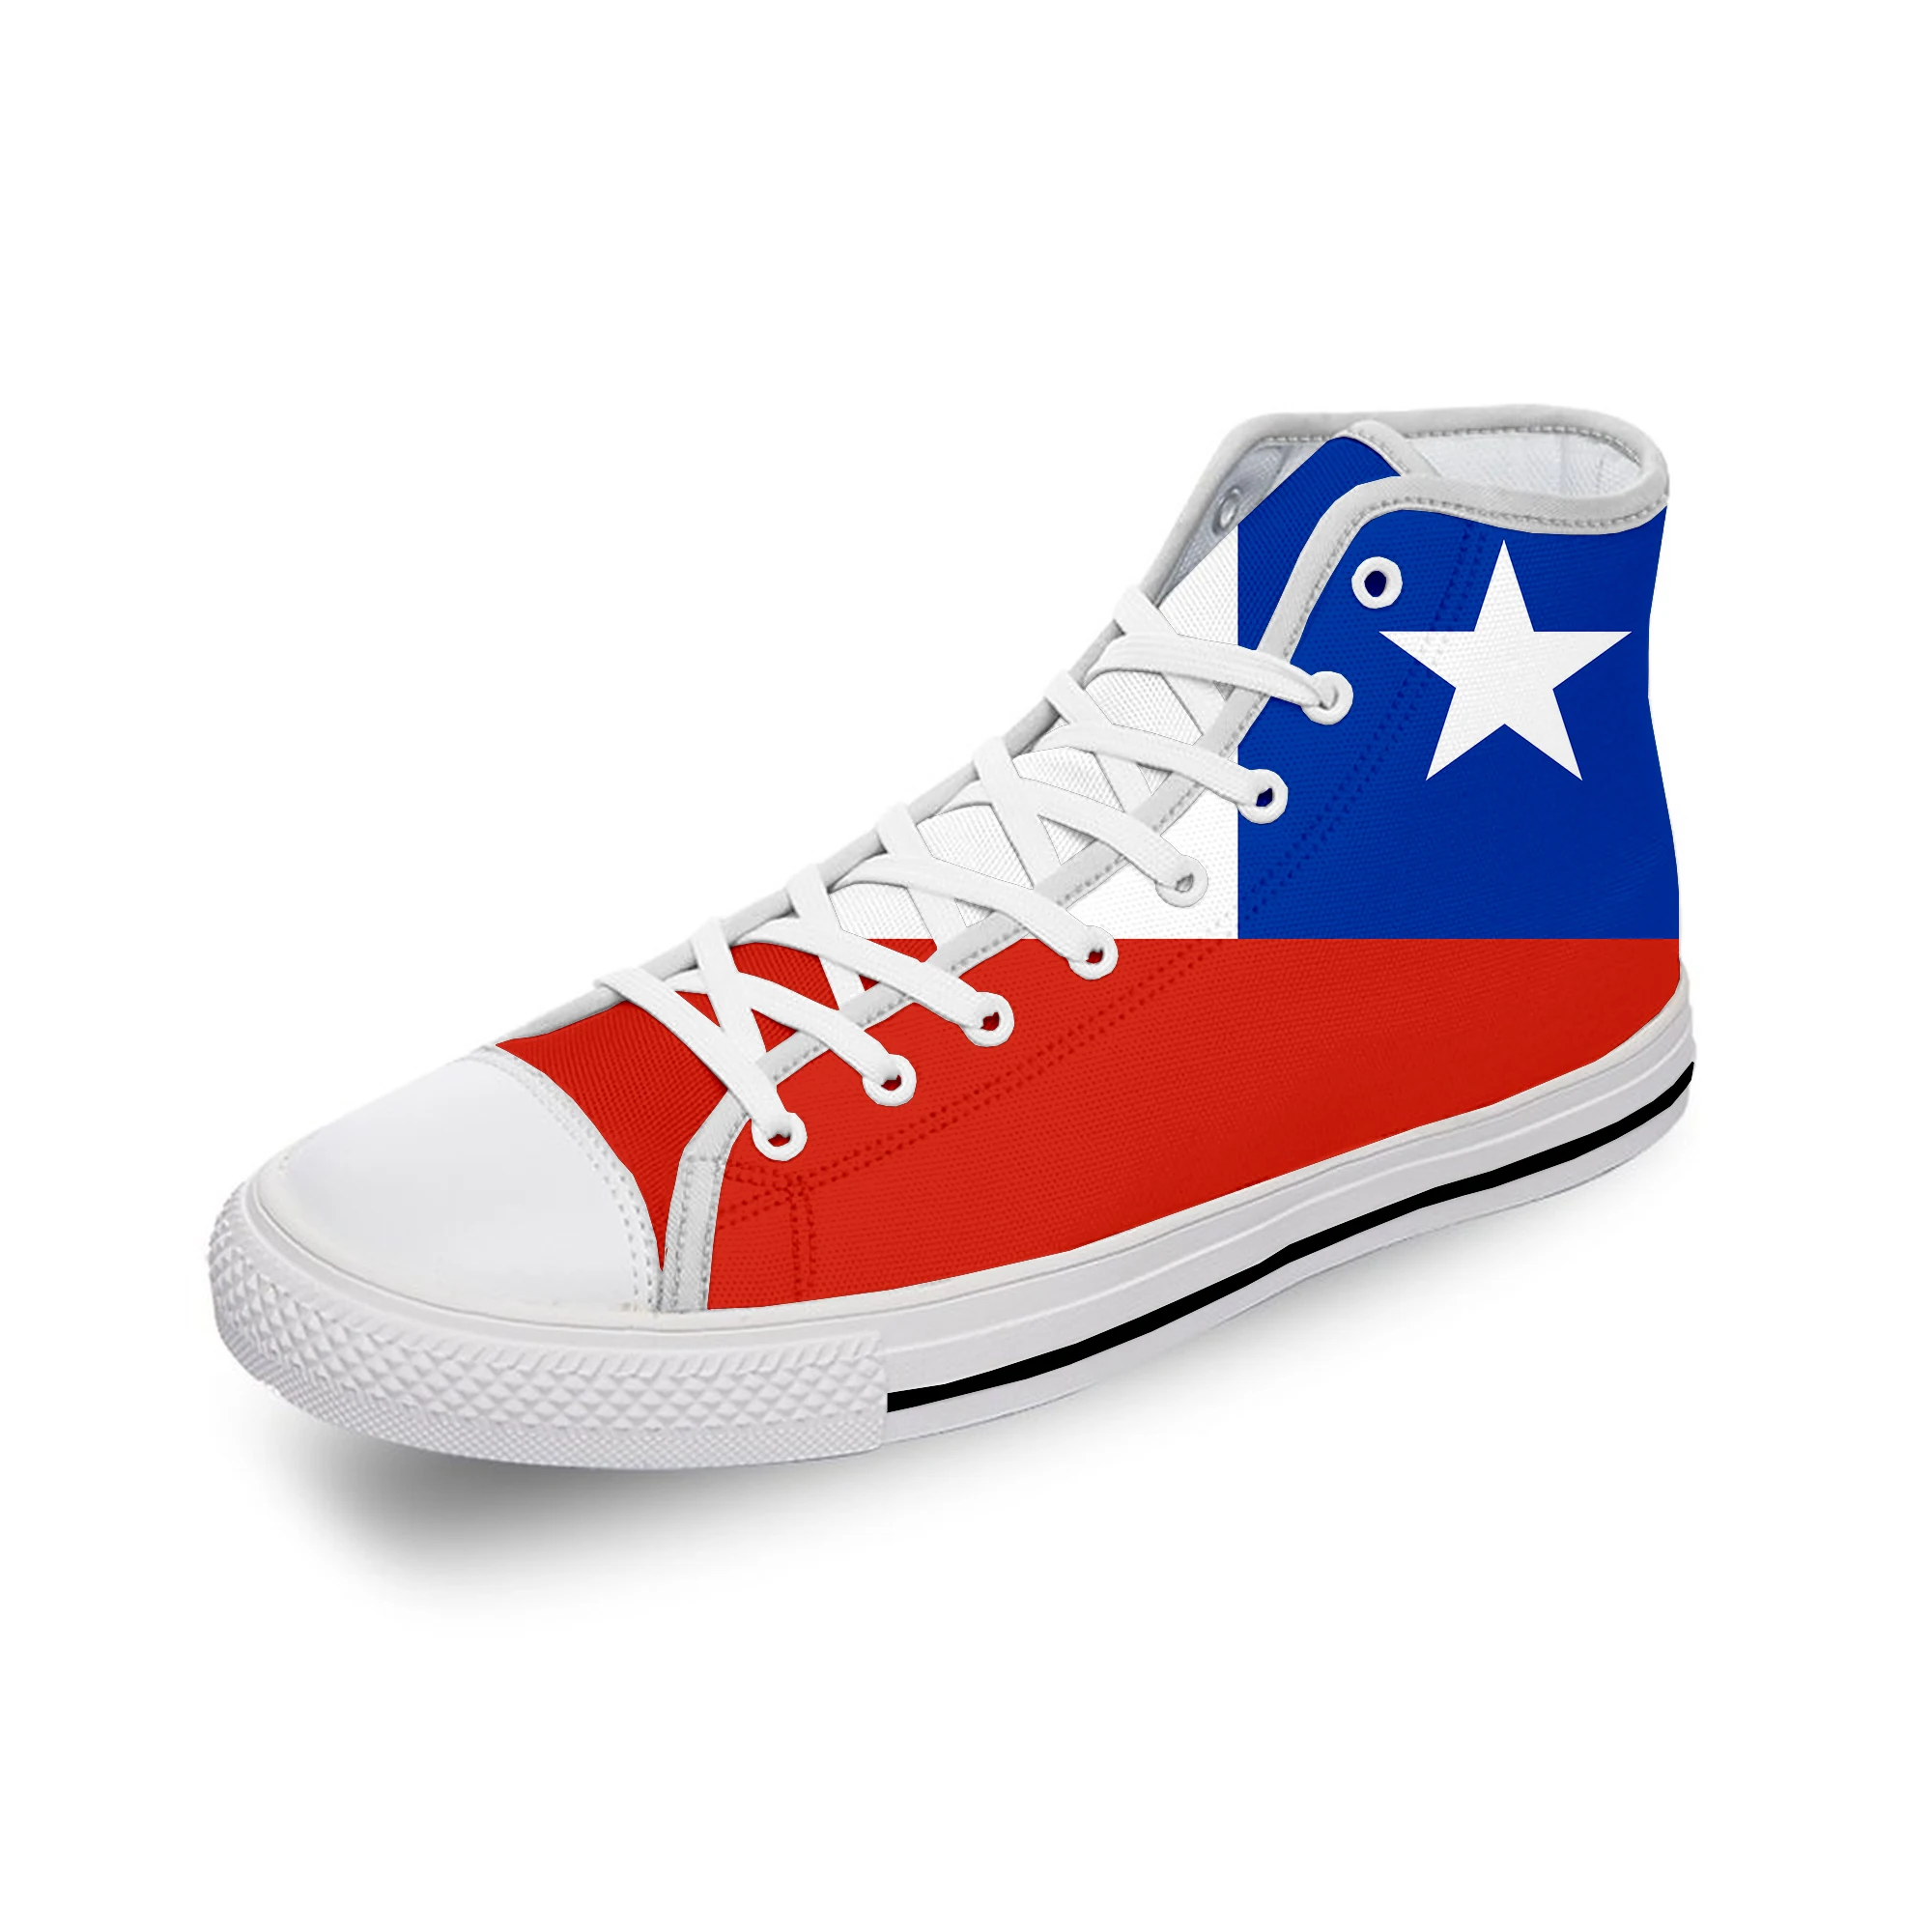 Chilean Flag Chile Patriotic Cool White Cloth Fashion 3D Print High Top Canvas Shoes Men Women Lightweight Breathable Sneakers mexico mexican flag patriotic cool white cloth fashion 3d print low top canvas shoes men women lightweight breathable sneakers